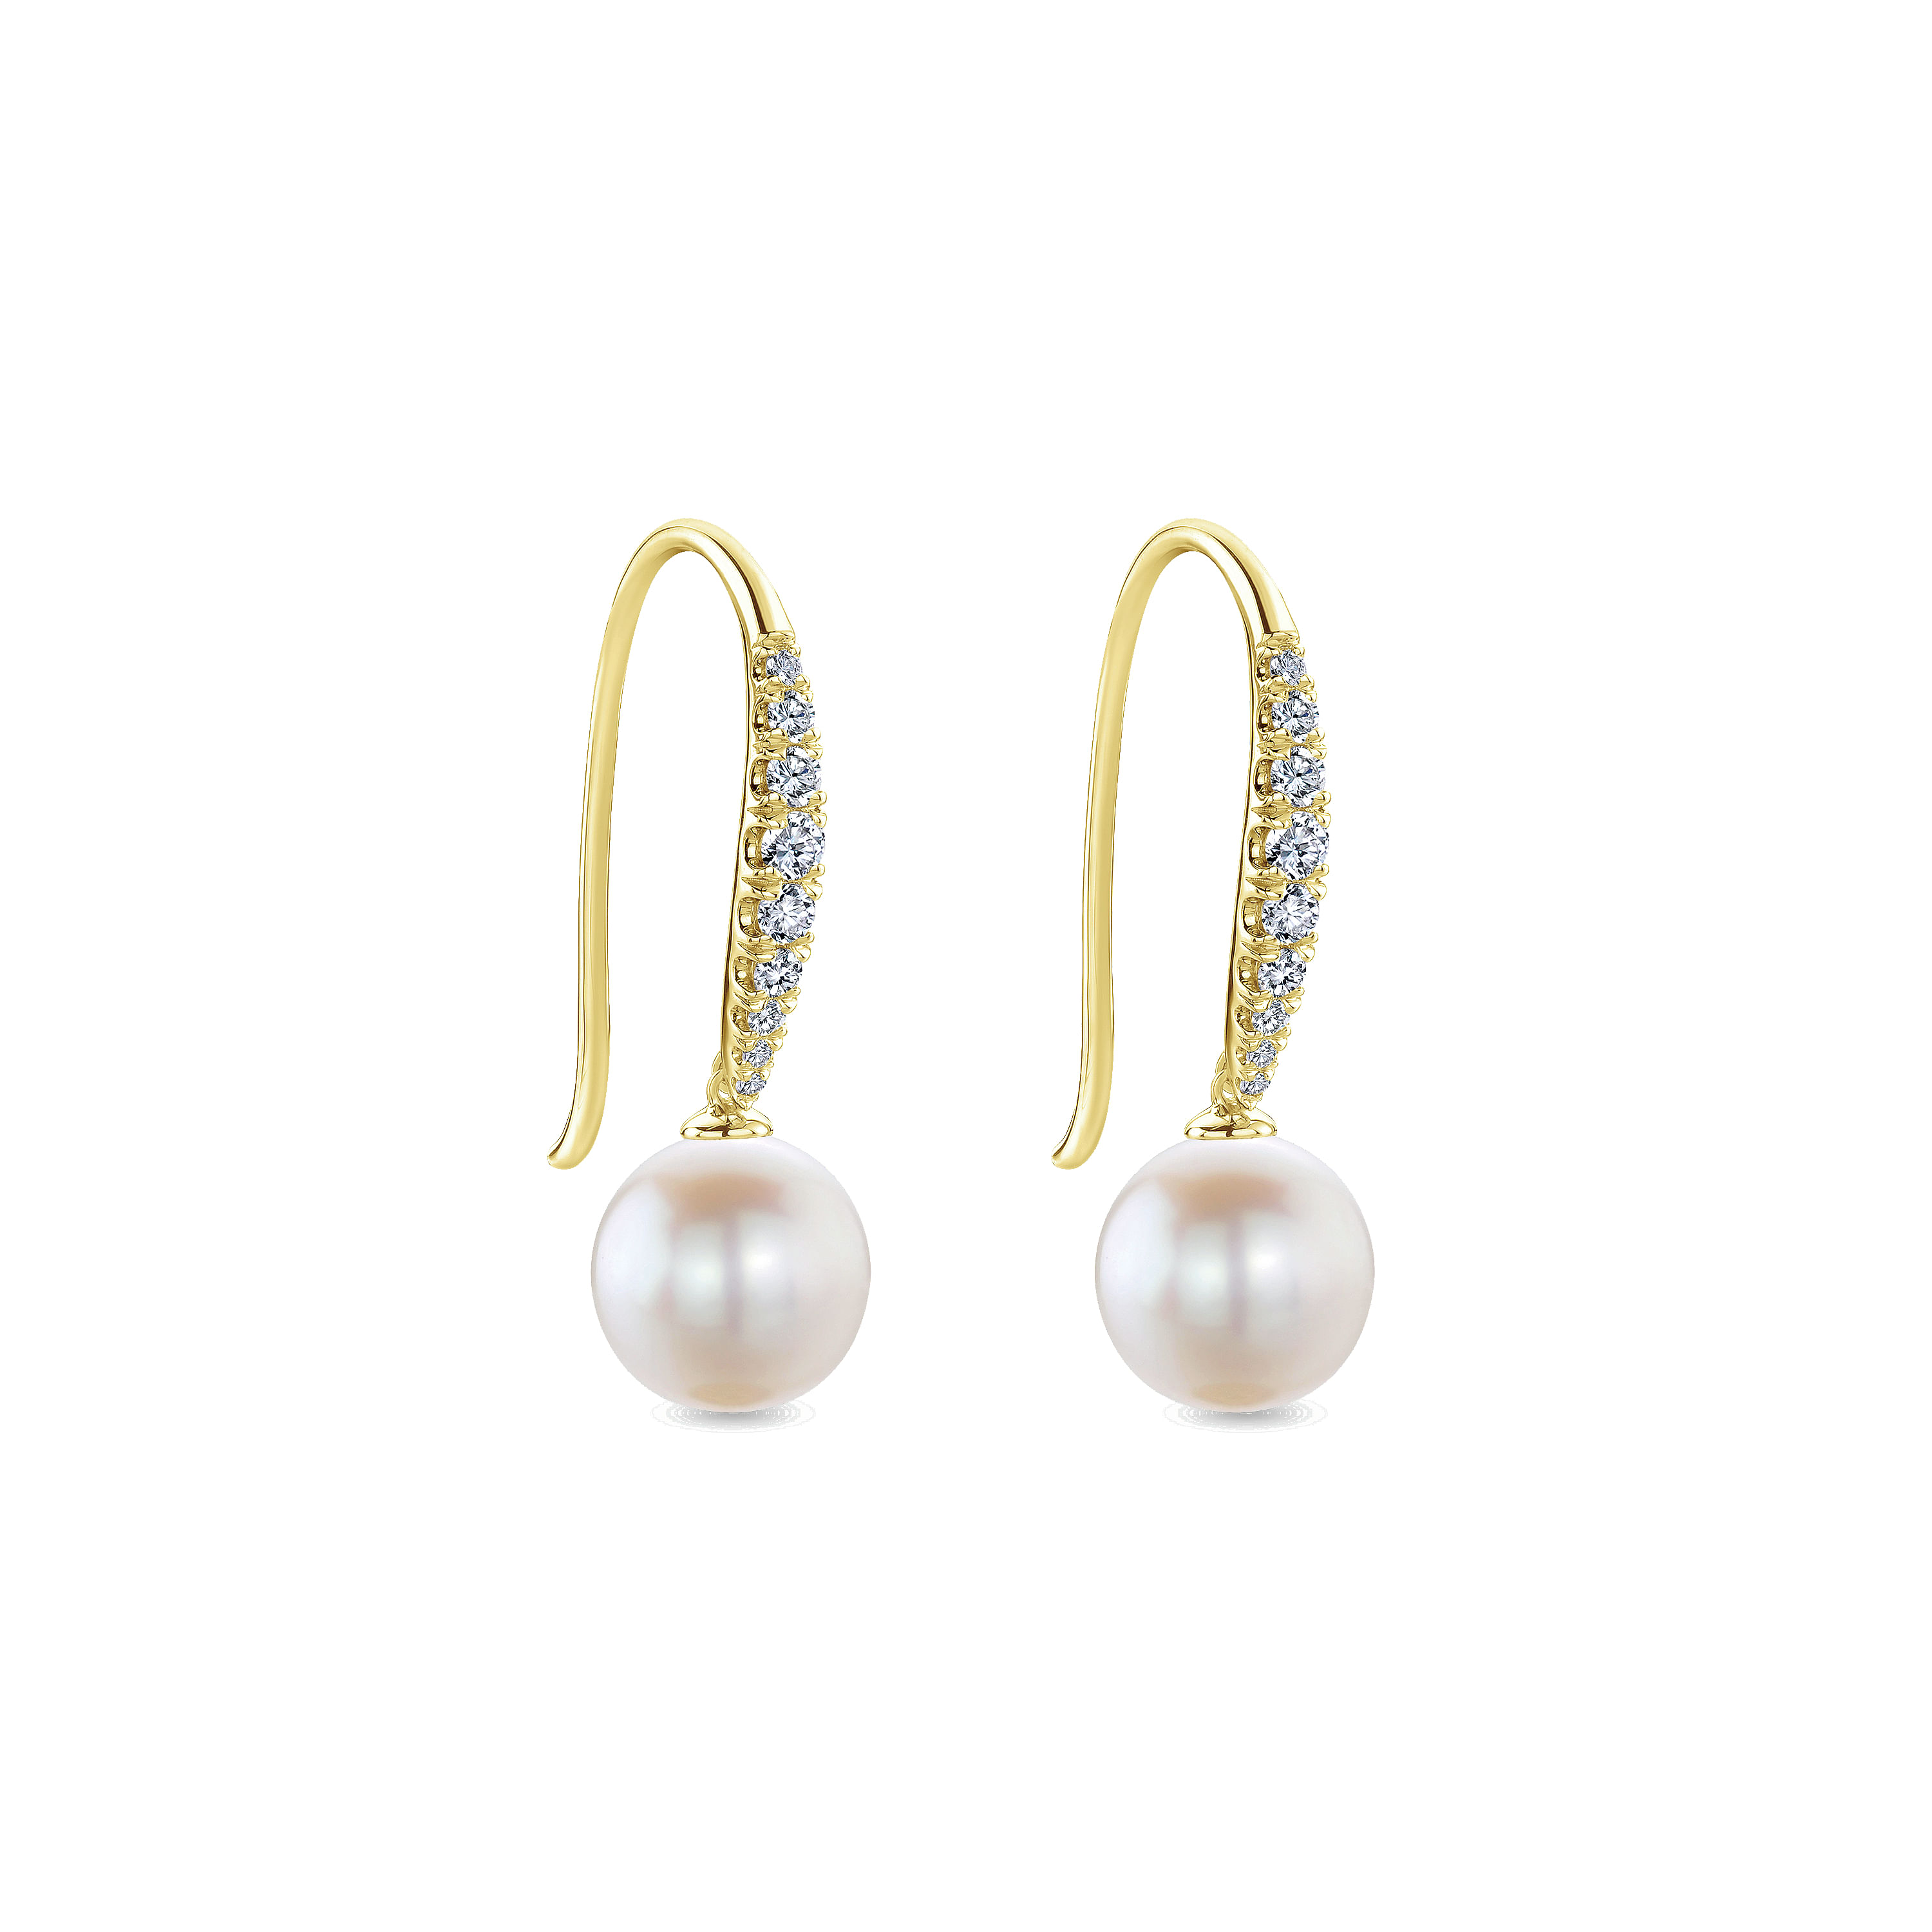 14K Yellow Gold Diamond and Pearl Fish Wire Drop Earrings